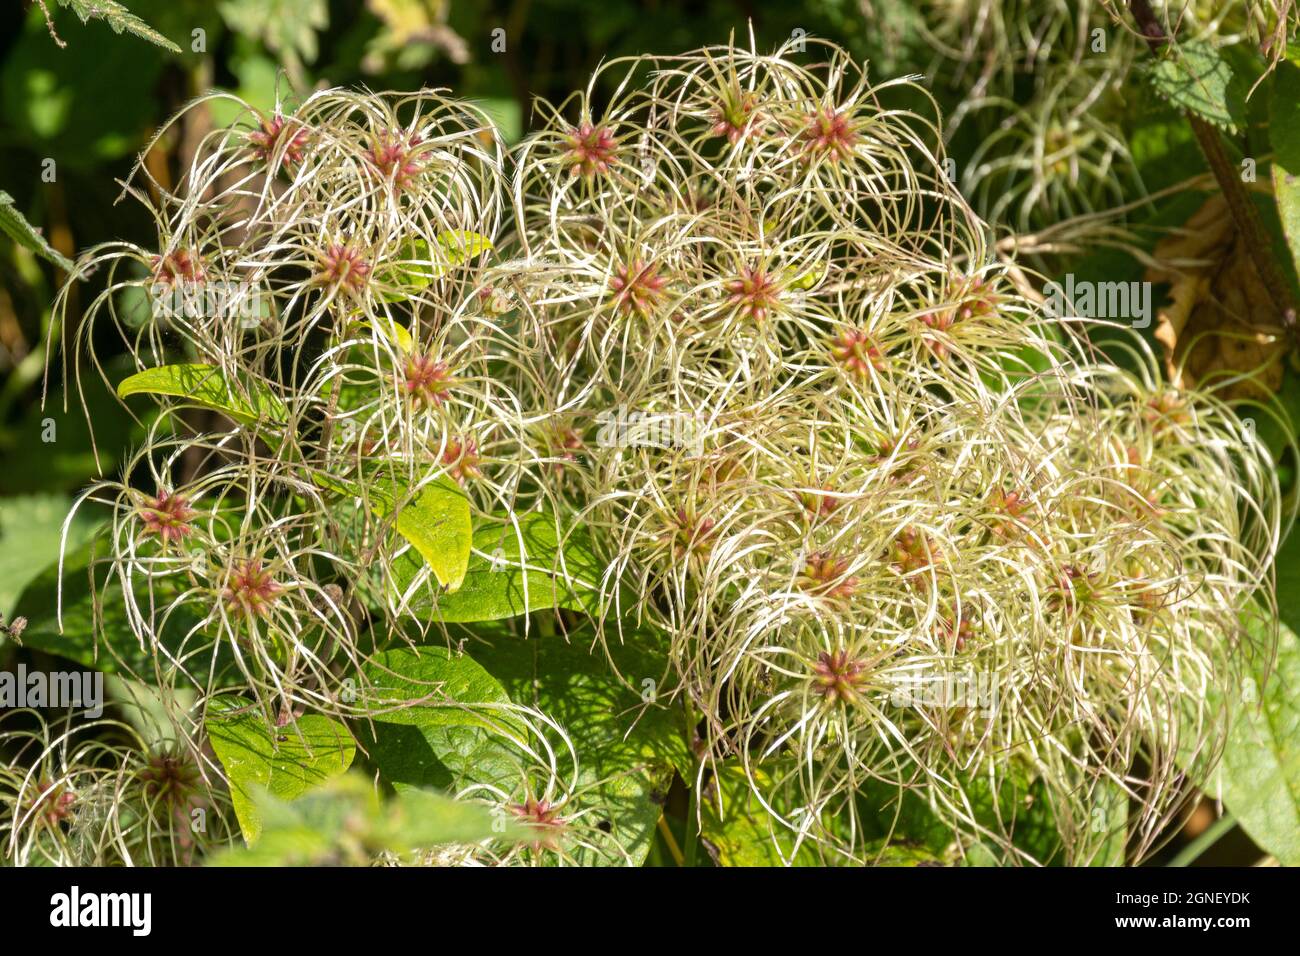 Wild clematis seed heads (Clematis vitalba) also called old man's beard or traveller's joy, a wild native plant during September or autumn, England UK Stock Photo